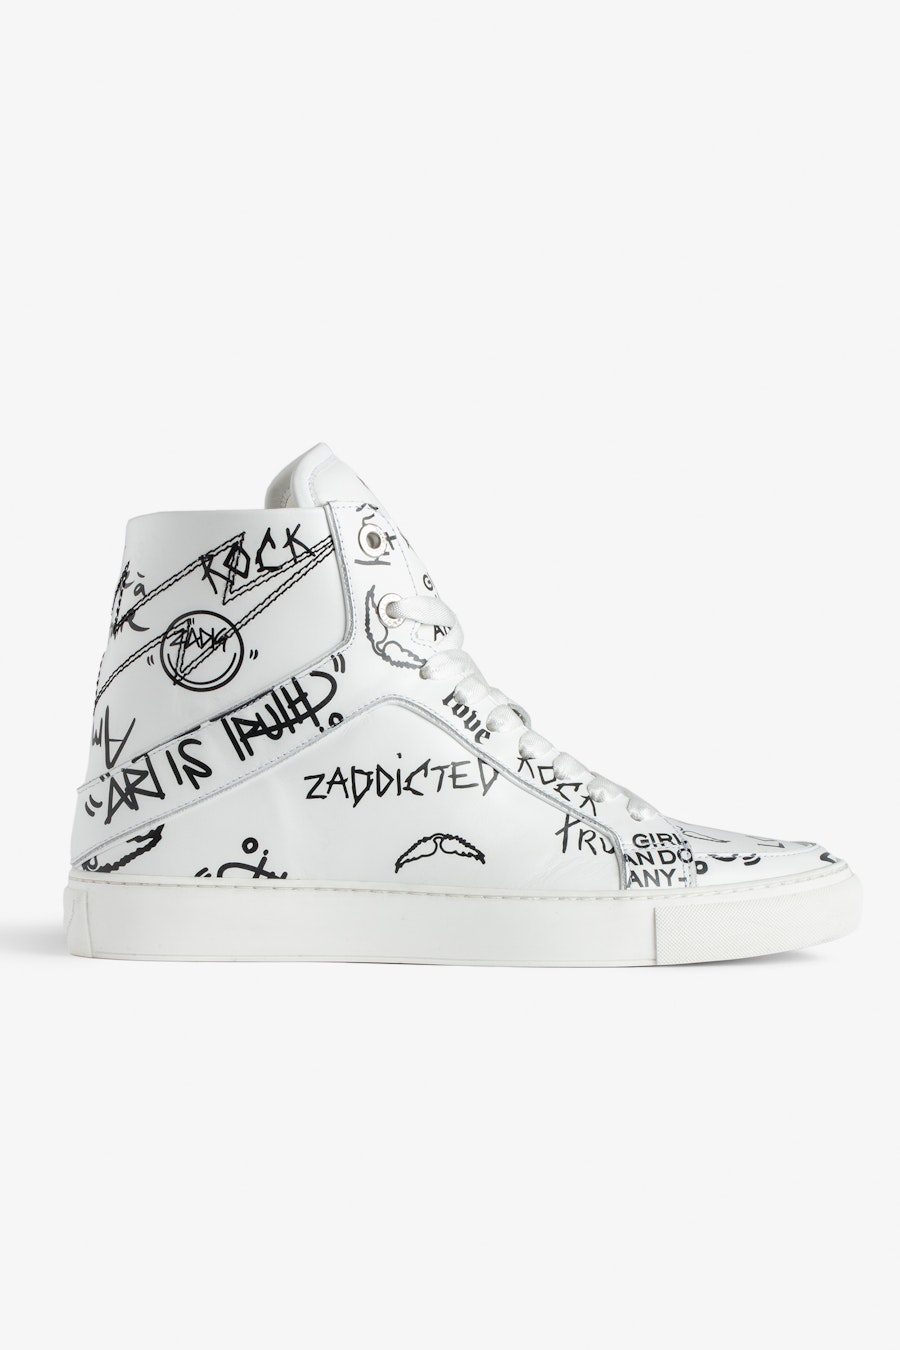 ZADIG&VOLTAIRE ZV1747 High Flash High-Top Graffiti Sneakers